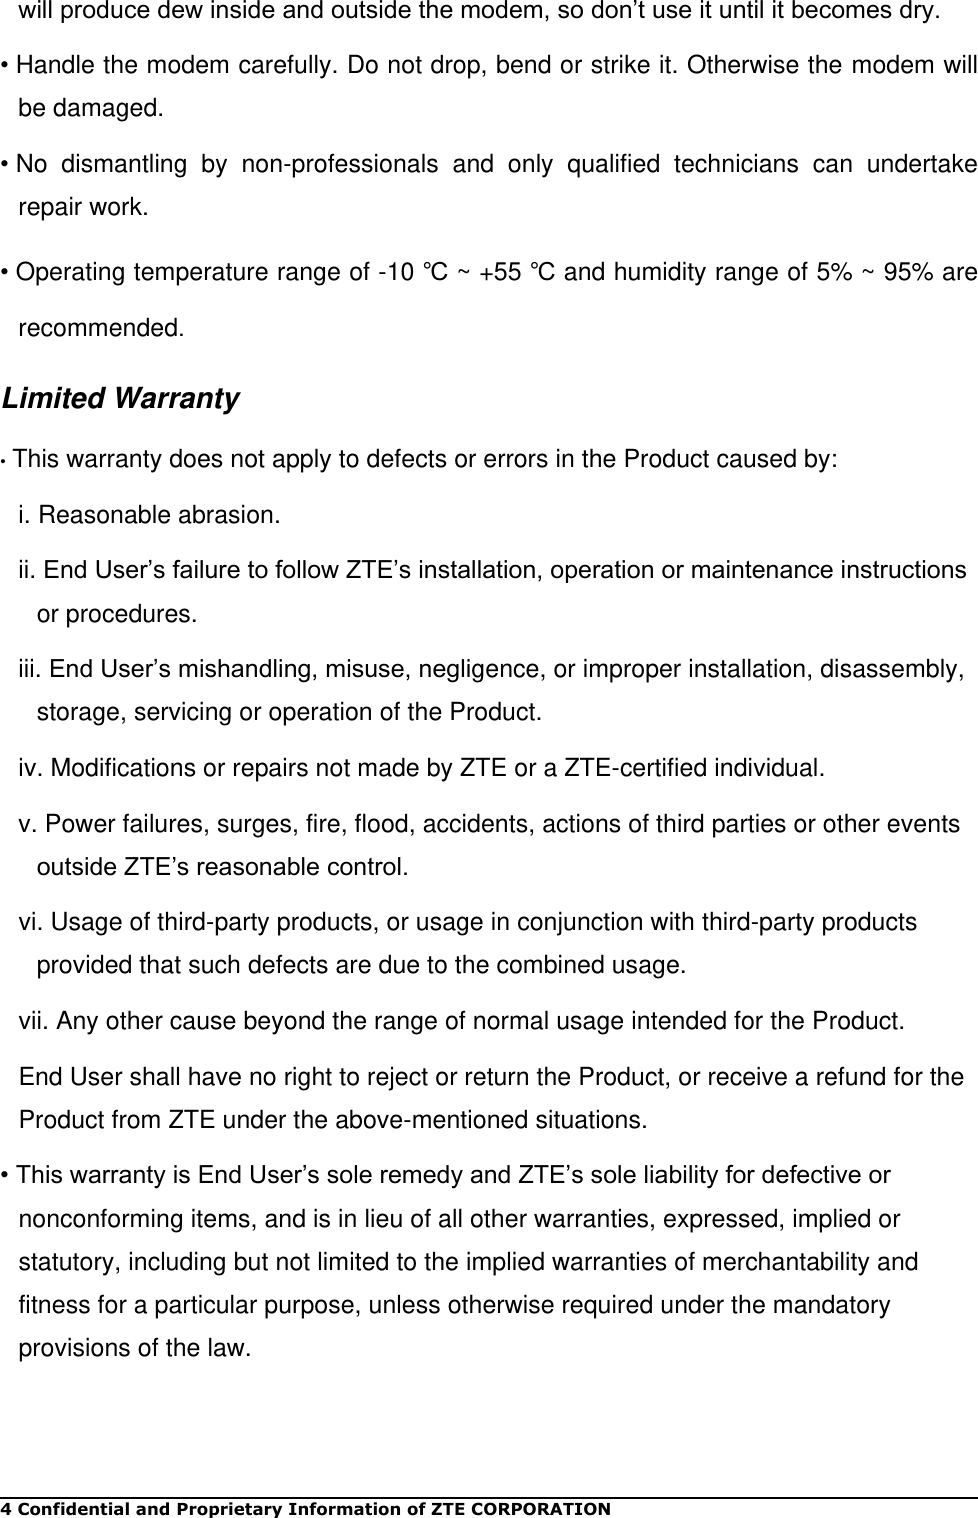 4 Confidential and Proprietary Information of ZTE CORPORATION will produce dew inside and outside the modem, so don’t use it until it becomes dry. • Handle the modem carefully. Do not drop, bend or strike it. Otherwise the modem will be damaged. • No  dismantling  by  non-professionals  and  only  qualified  technicians  can  undertake repair work. • Operating temperature range of -10 ℃ ~ +55 ℃ and humidity range of 5% ~ 95% are recommended. Limited Warranty • This warranty does not apply to defects or errors in the Product caused by: i. Reasonable abrasion. ii. End User’s failure to follow ZTE’s installation, operation or maintenance instructions or procedures. iii. End User’s mishandling, misuse, negligence, or improper installation, disassembly, storage, servicing or operation of the Product. iv. Modifications or repairs not made by ZTE or a ZTE-certified individual. v. Power failures, surges, fire, flood, accidents, actions of third parties or other events outside ZTE’s reasonable control. vi. Usage of third-party products, or usage in conjunction with third-party products provided that such defects are due to the combined usage. vii. Any other cause beyond the range of normal usage intended for the Product. End User shall have no right to reject or return the Product, or receive a refund for the Product from ZTE under the above-mentioned situations. • This warranty is End User’s sole remedy and ZTE’s sole liability for defective or nonconforming items, and is in lieu of all other warranties, expressed, implied or statutory, including but not limited to the implied warranties of merchantability and fitness for a particular purpose, unless otherwise required under the mandatory provisions of the law.   